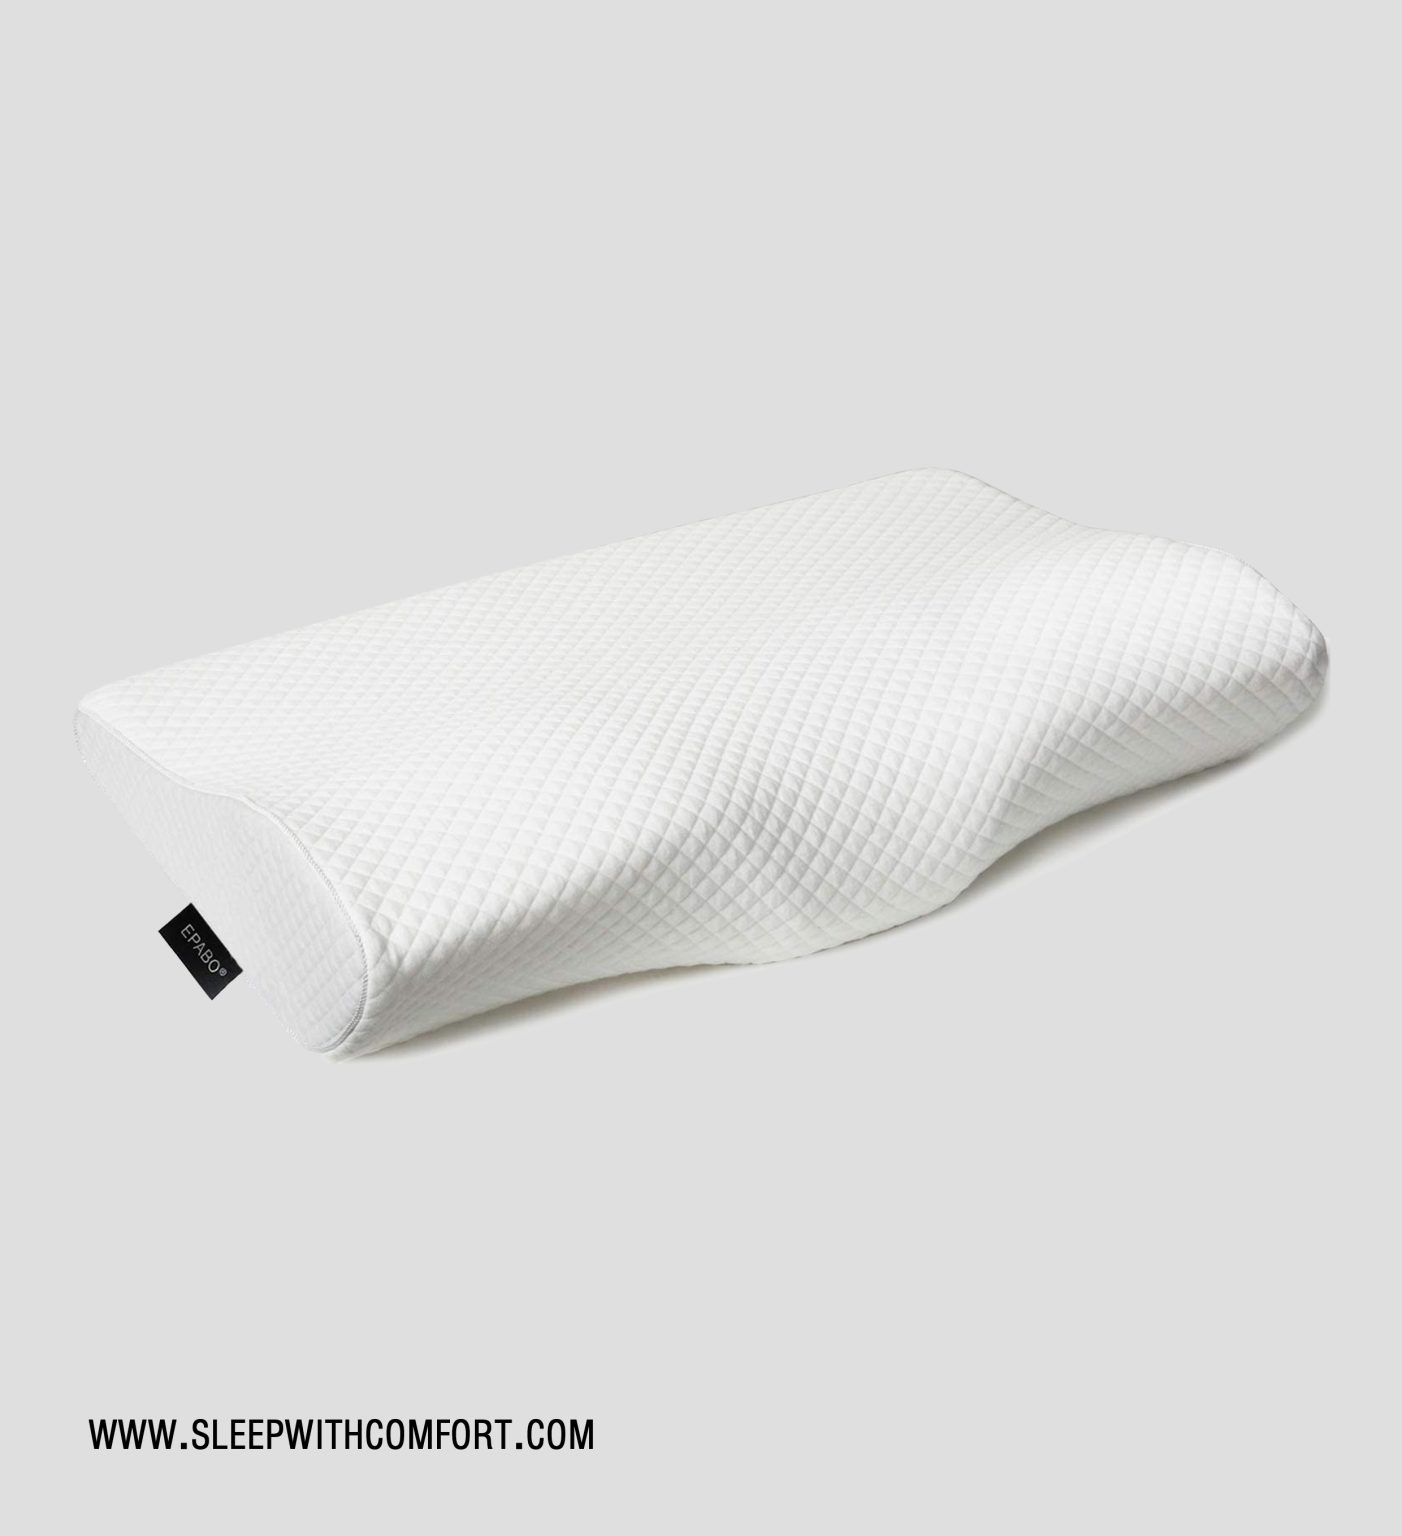 11 Best Anti Wrinkle Pillows To Buy In 2022